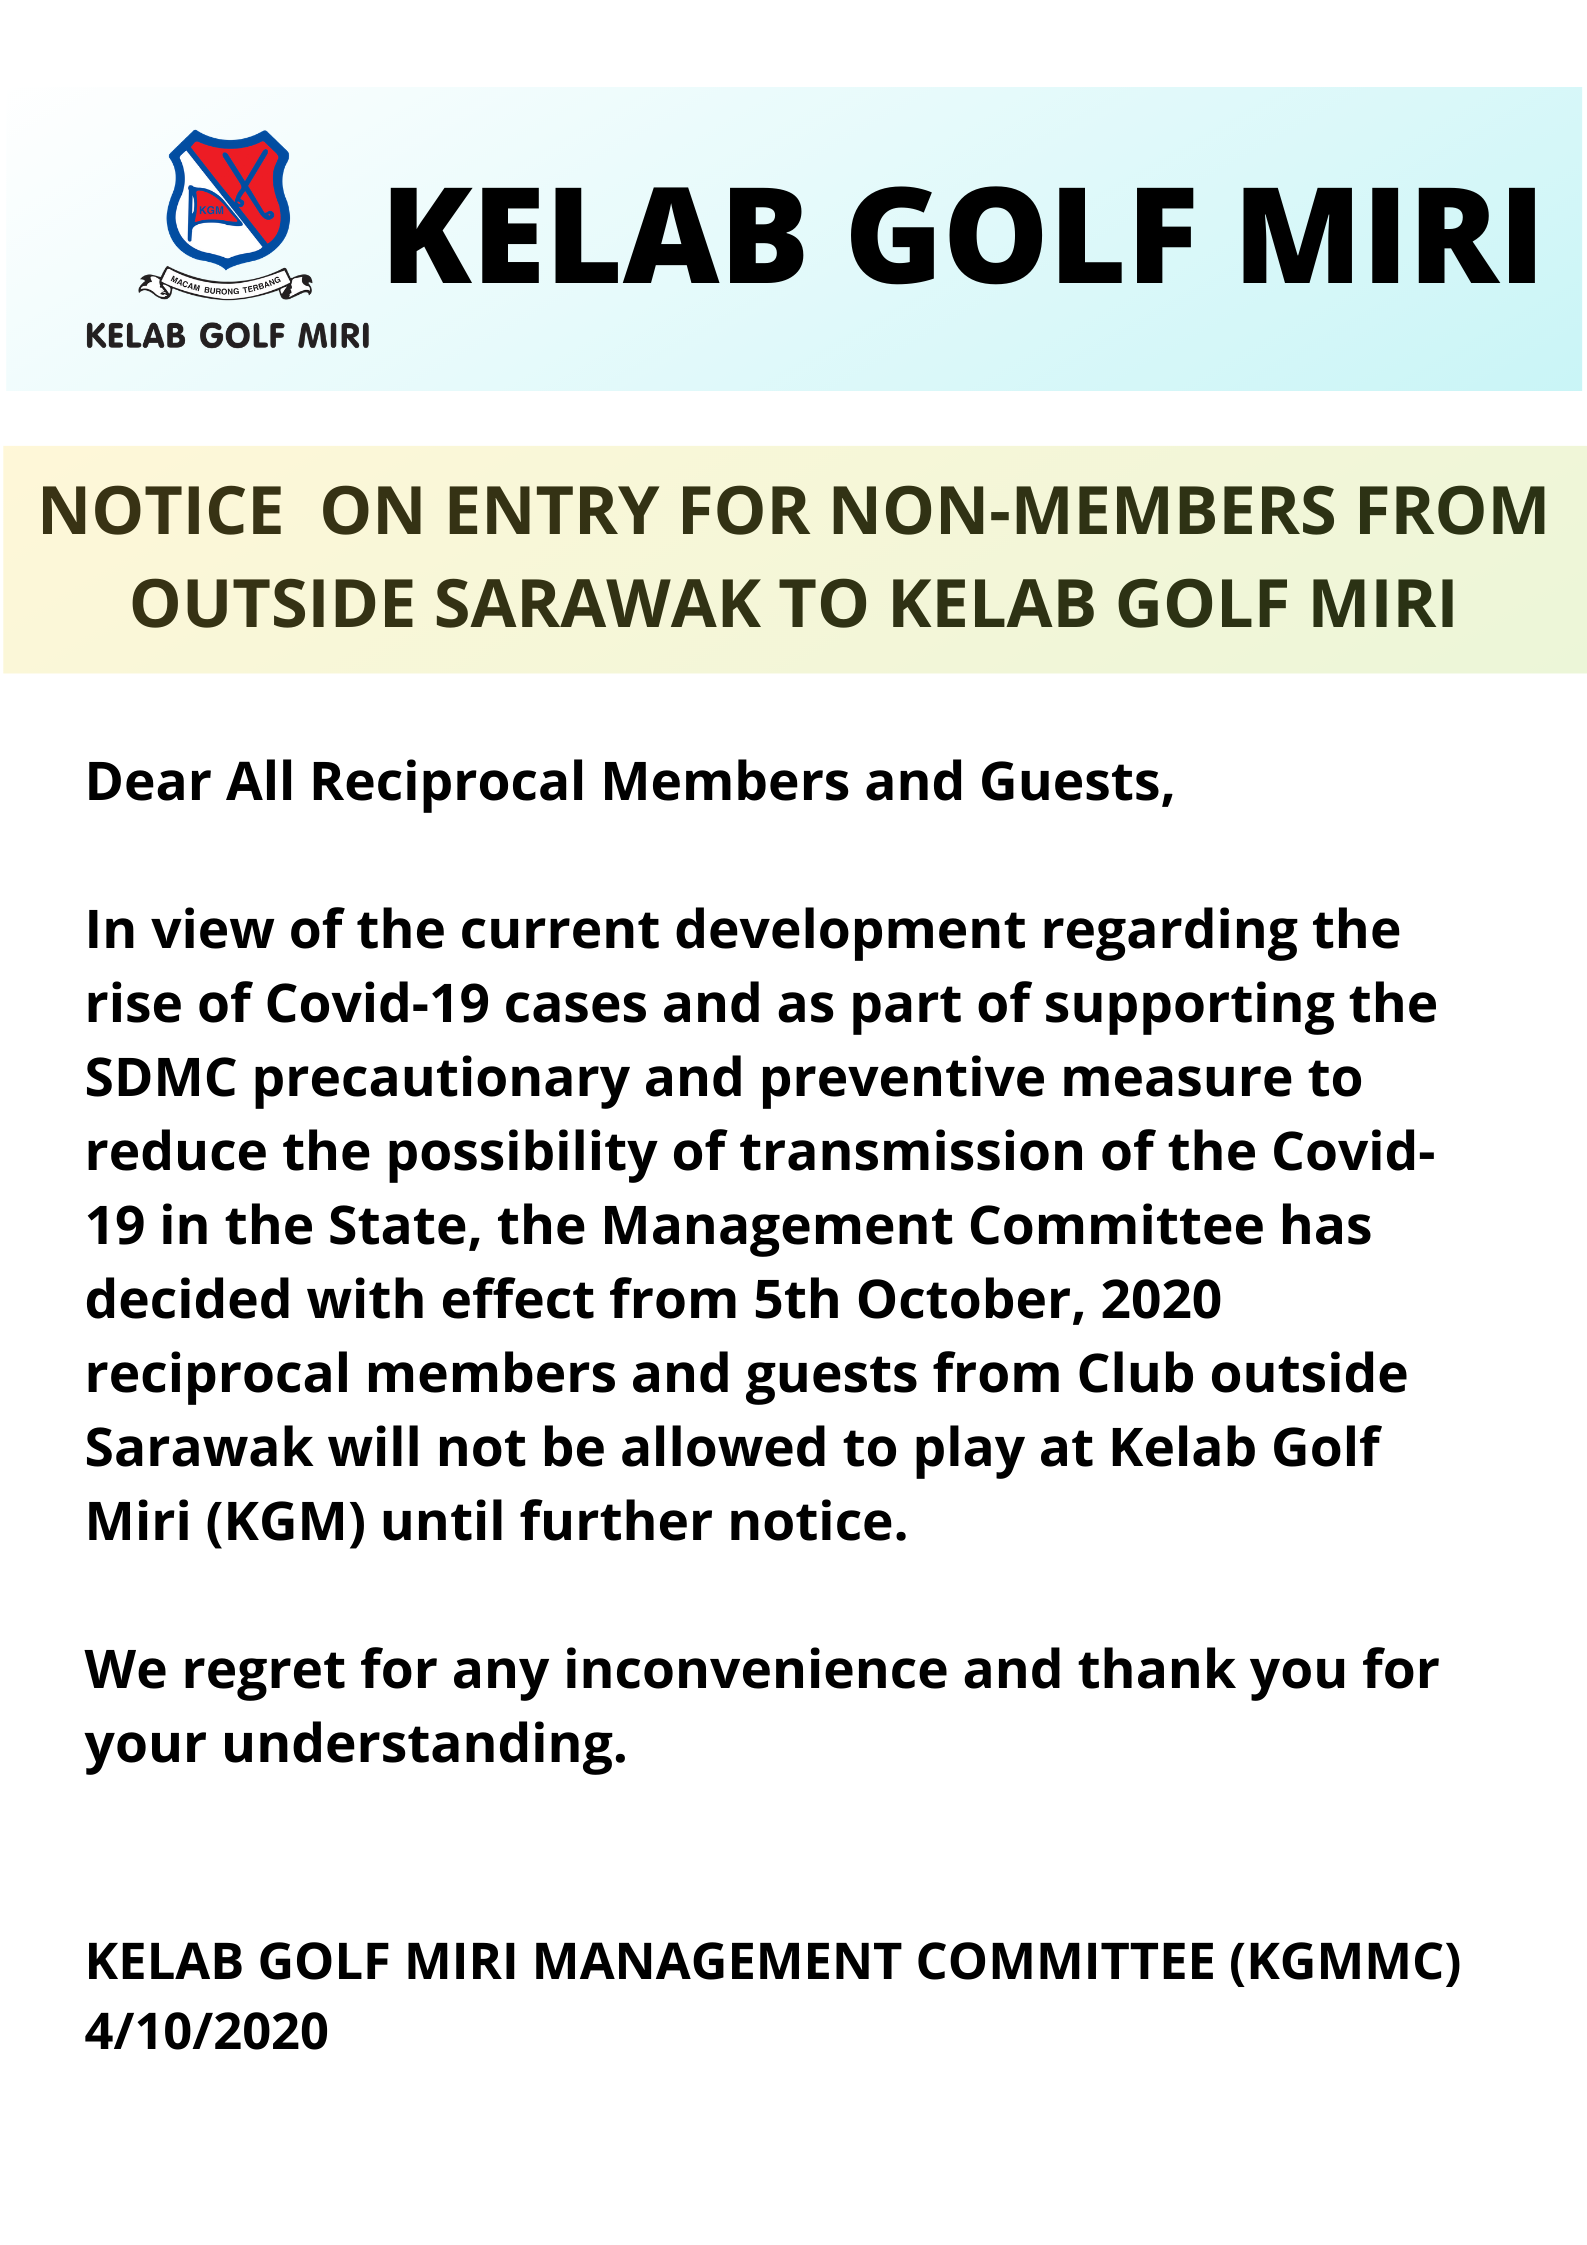 NOTICE ON ENTRY OF NON-MBRS v1